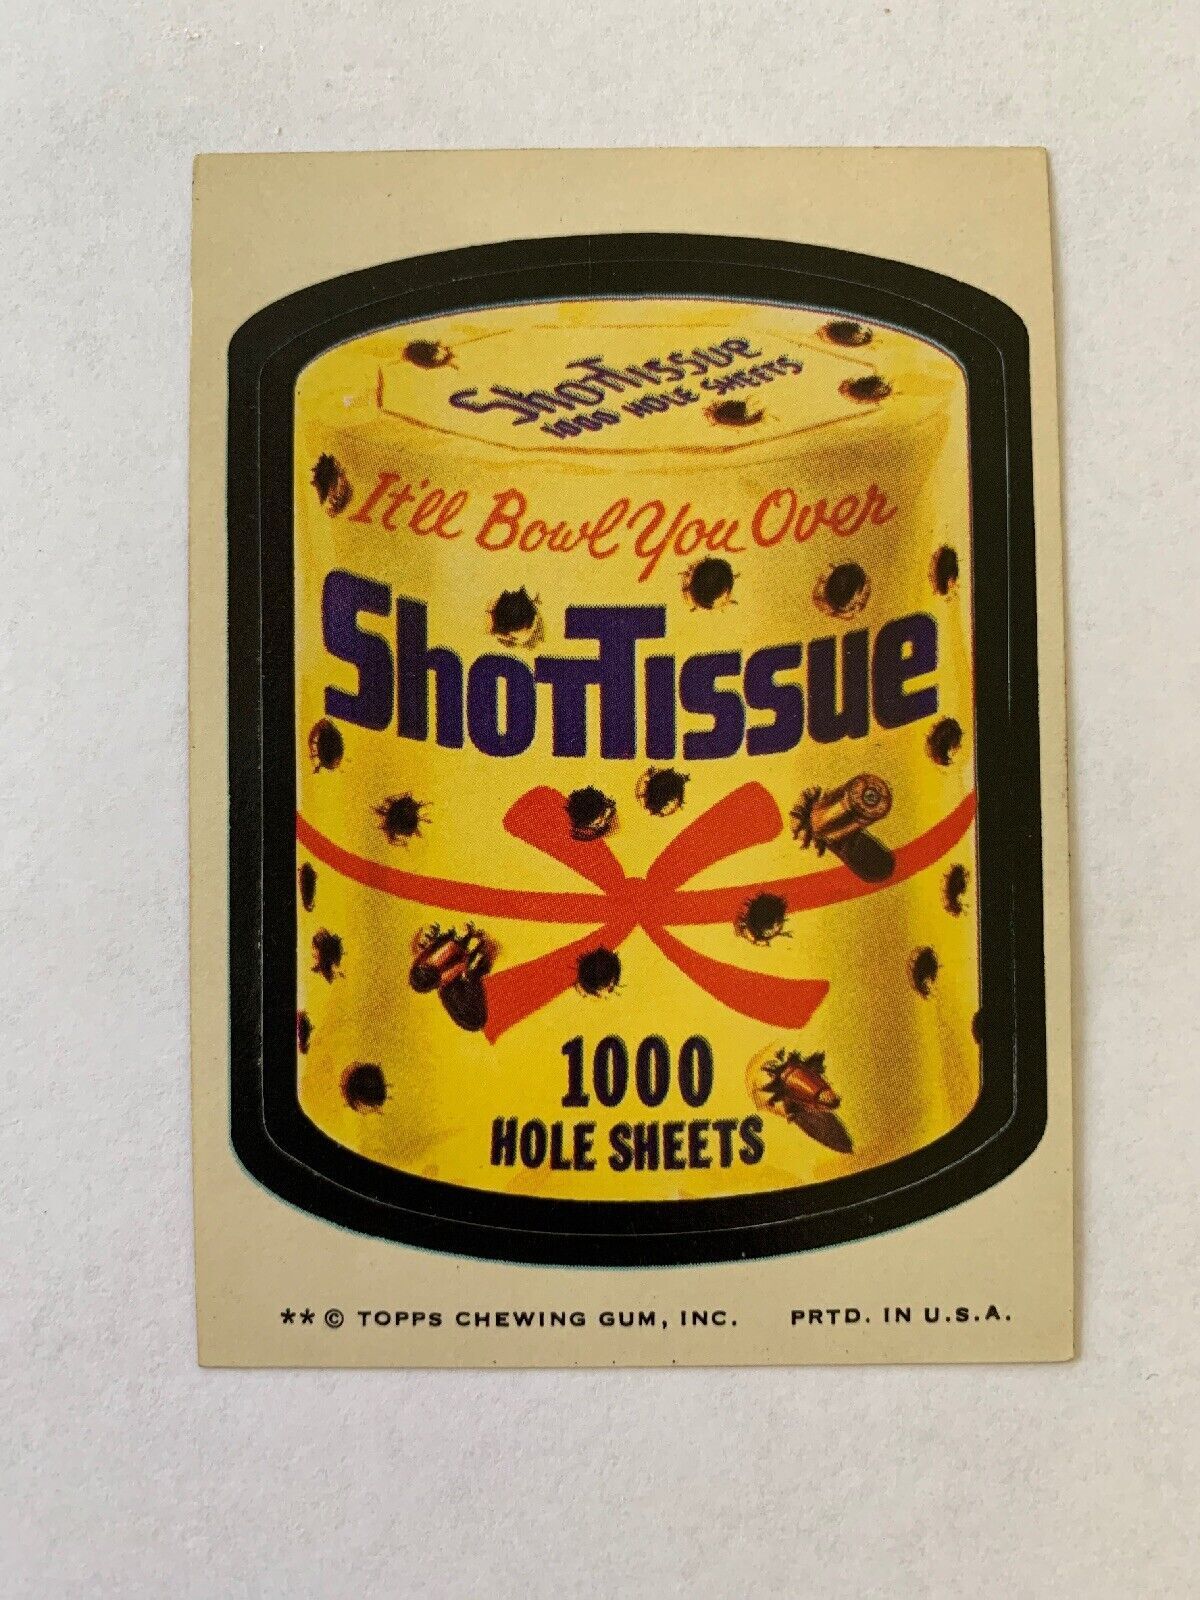 1974 TOPPS WACKY PACKAGES (SERIES 8) - SHOTTISSUE